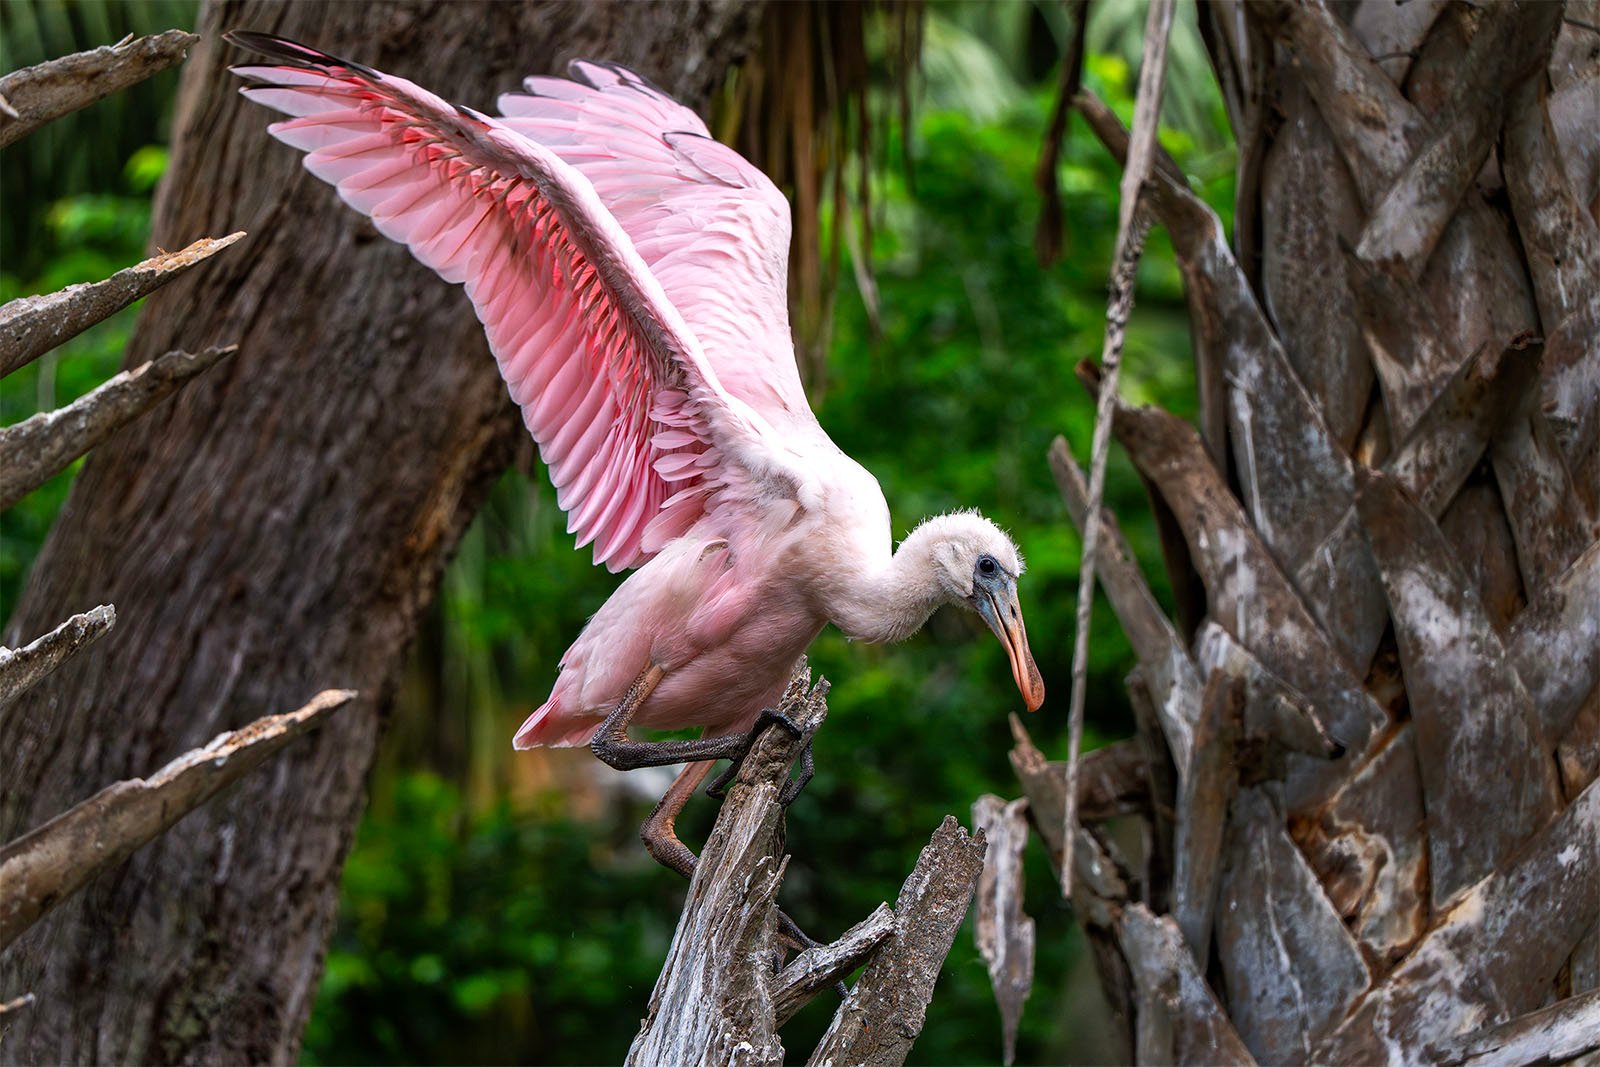 A roseate spoonbill with pink feathers and a distinctive spoon-shaped bill perches on a broken tree branch. Its wings are spread wide, showing intricate feather details. The background features green foliage and tree trunks.